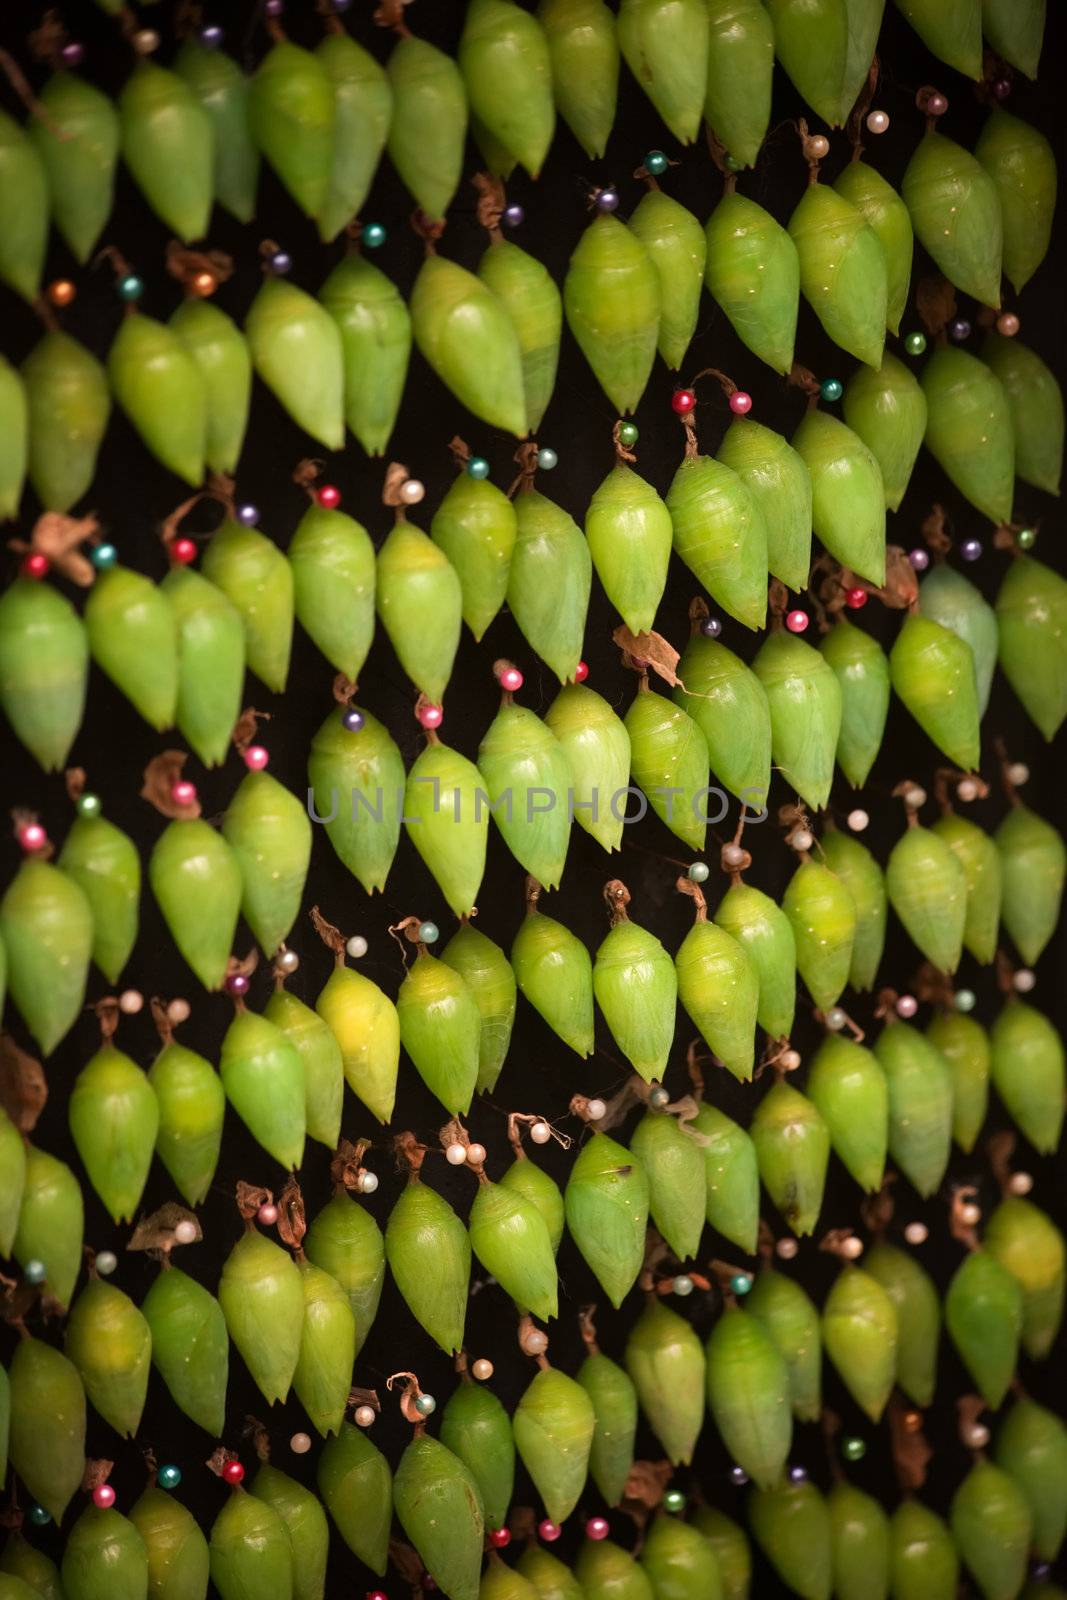 Group of cocoons held with pins waiting for Blue Morpho butterflies to emerge